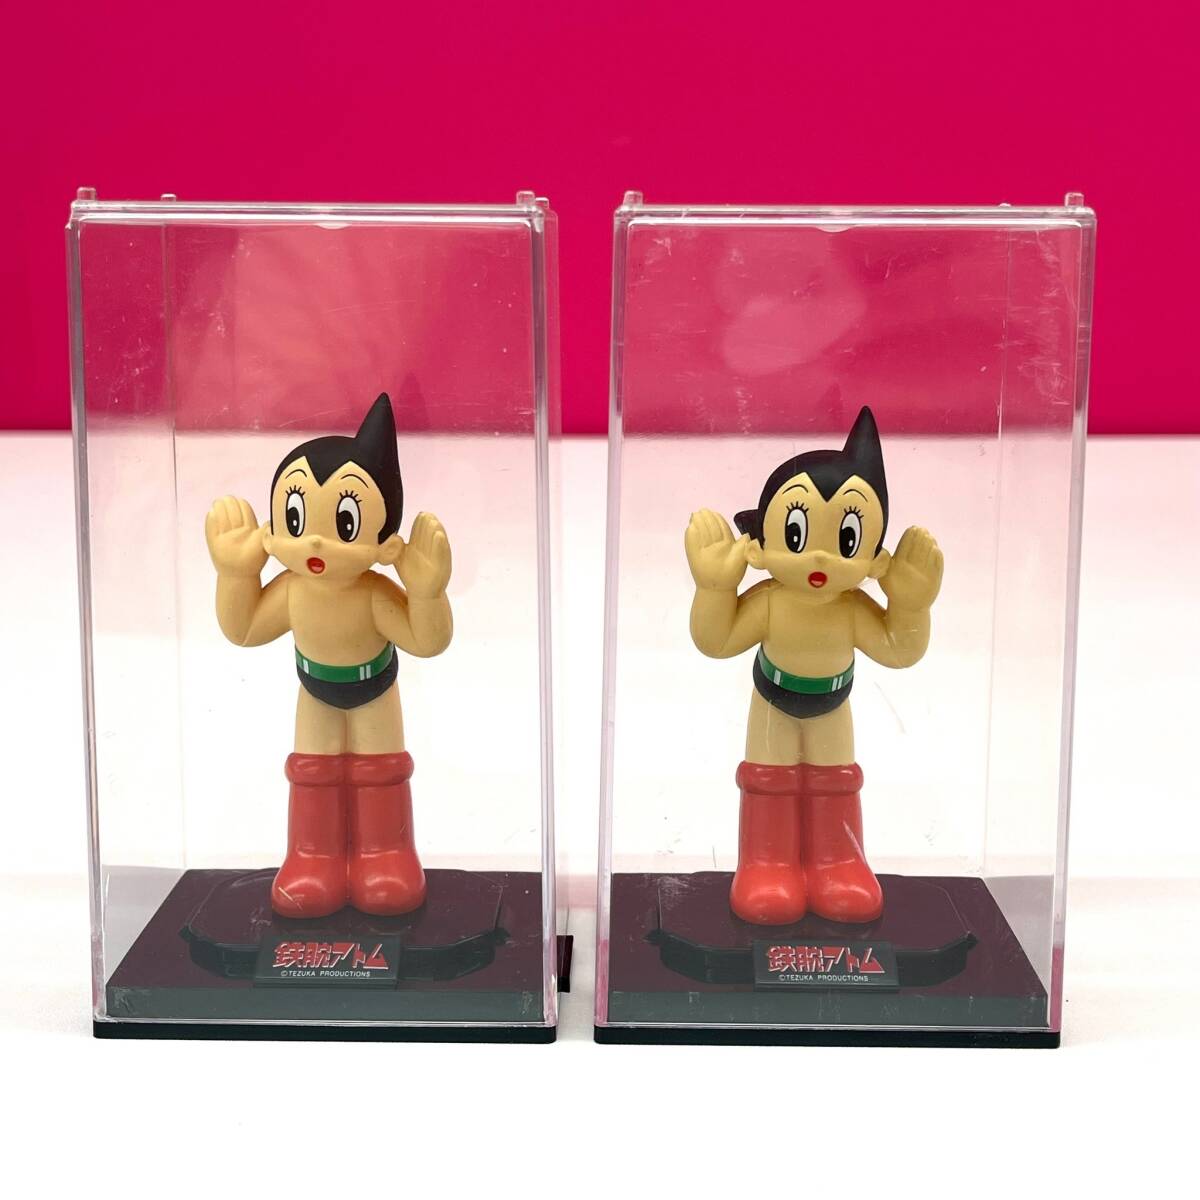 Y286-K46-1212 TOMY Tommy 1998 Astro Boy figure 2 point summarize hand .. insect TEZUKA PRODUCTION ornament case size approximately height 14/ width 7.5/ width 6cm